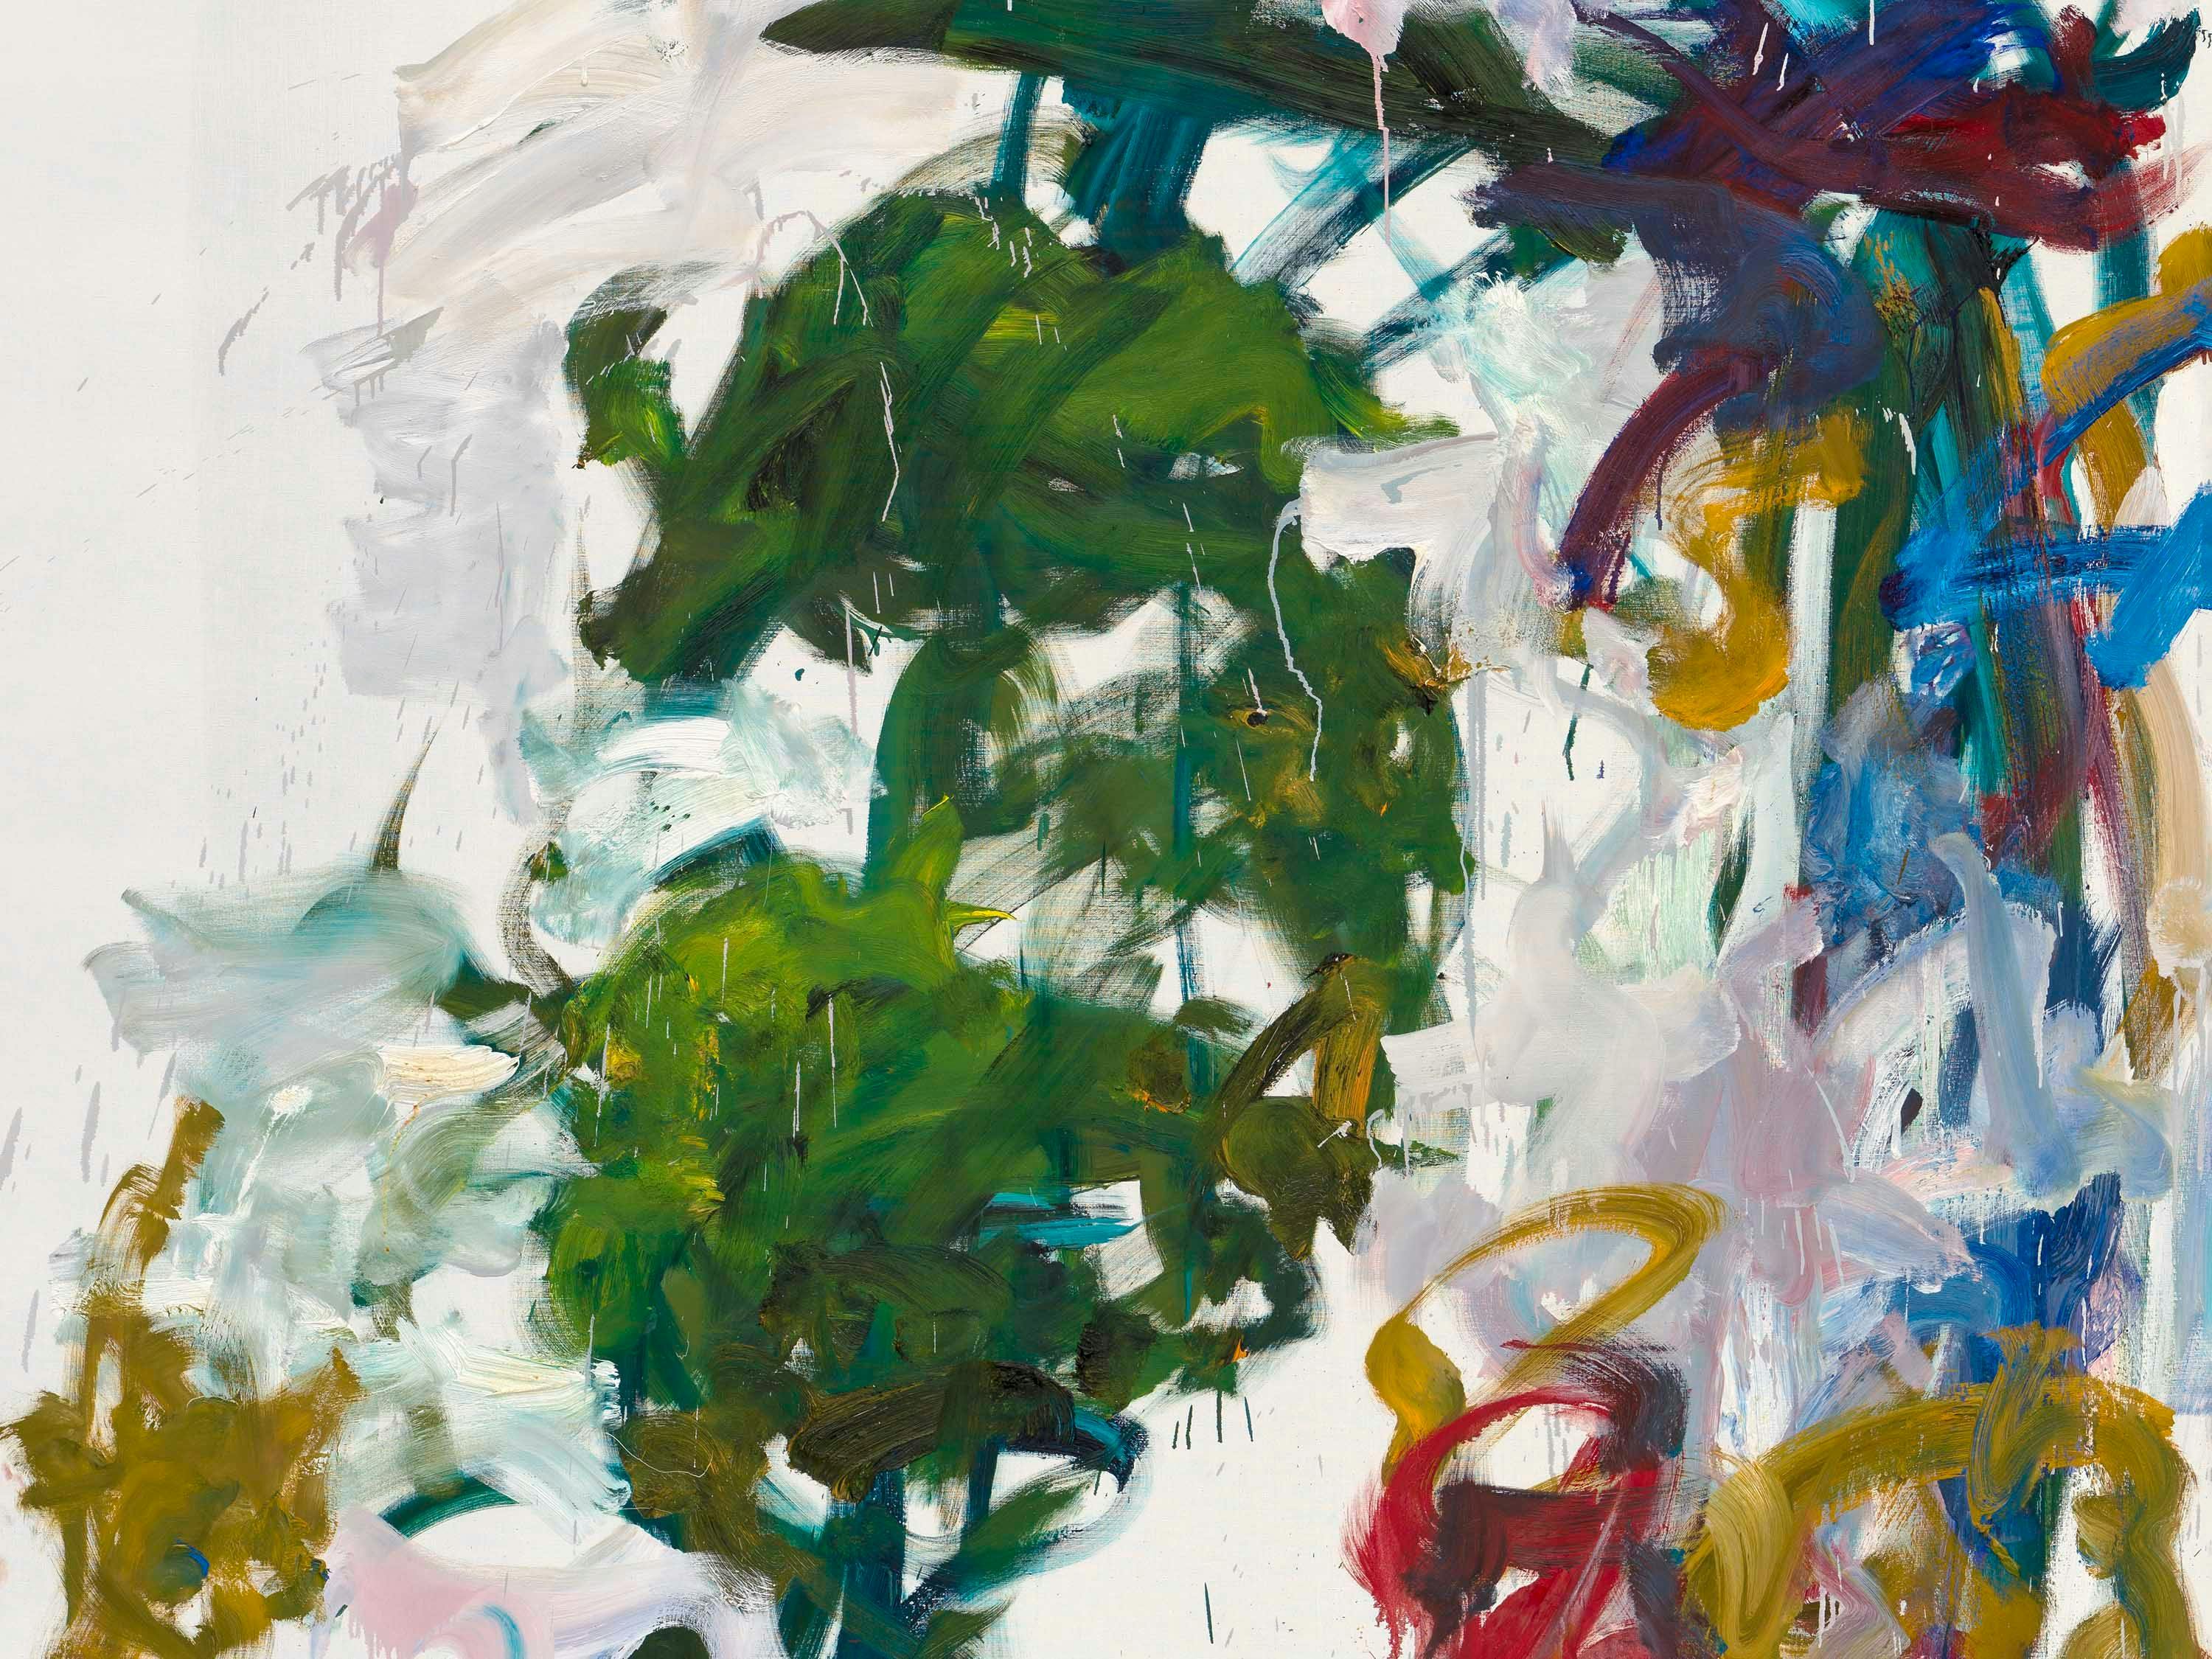 A detail from a painting by Joan Mitchell, titled Sunflowers, 1990 to 1991.